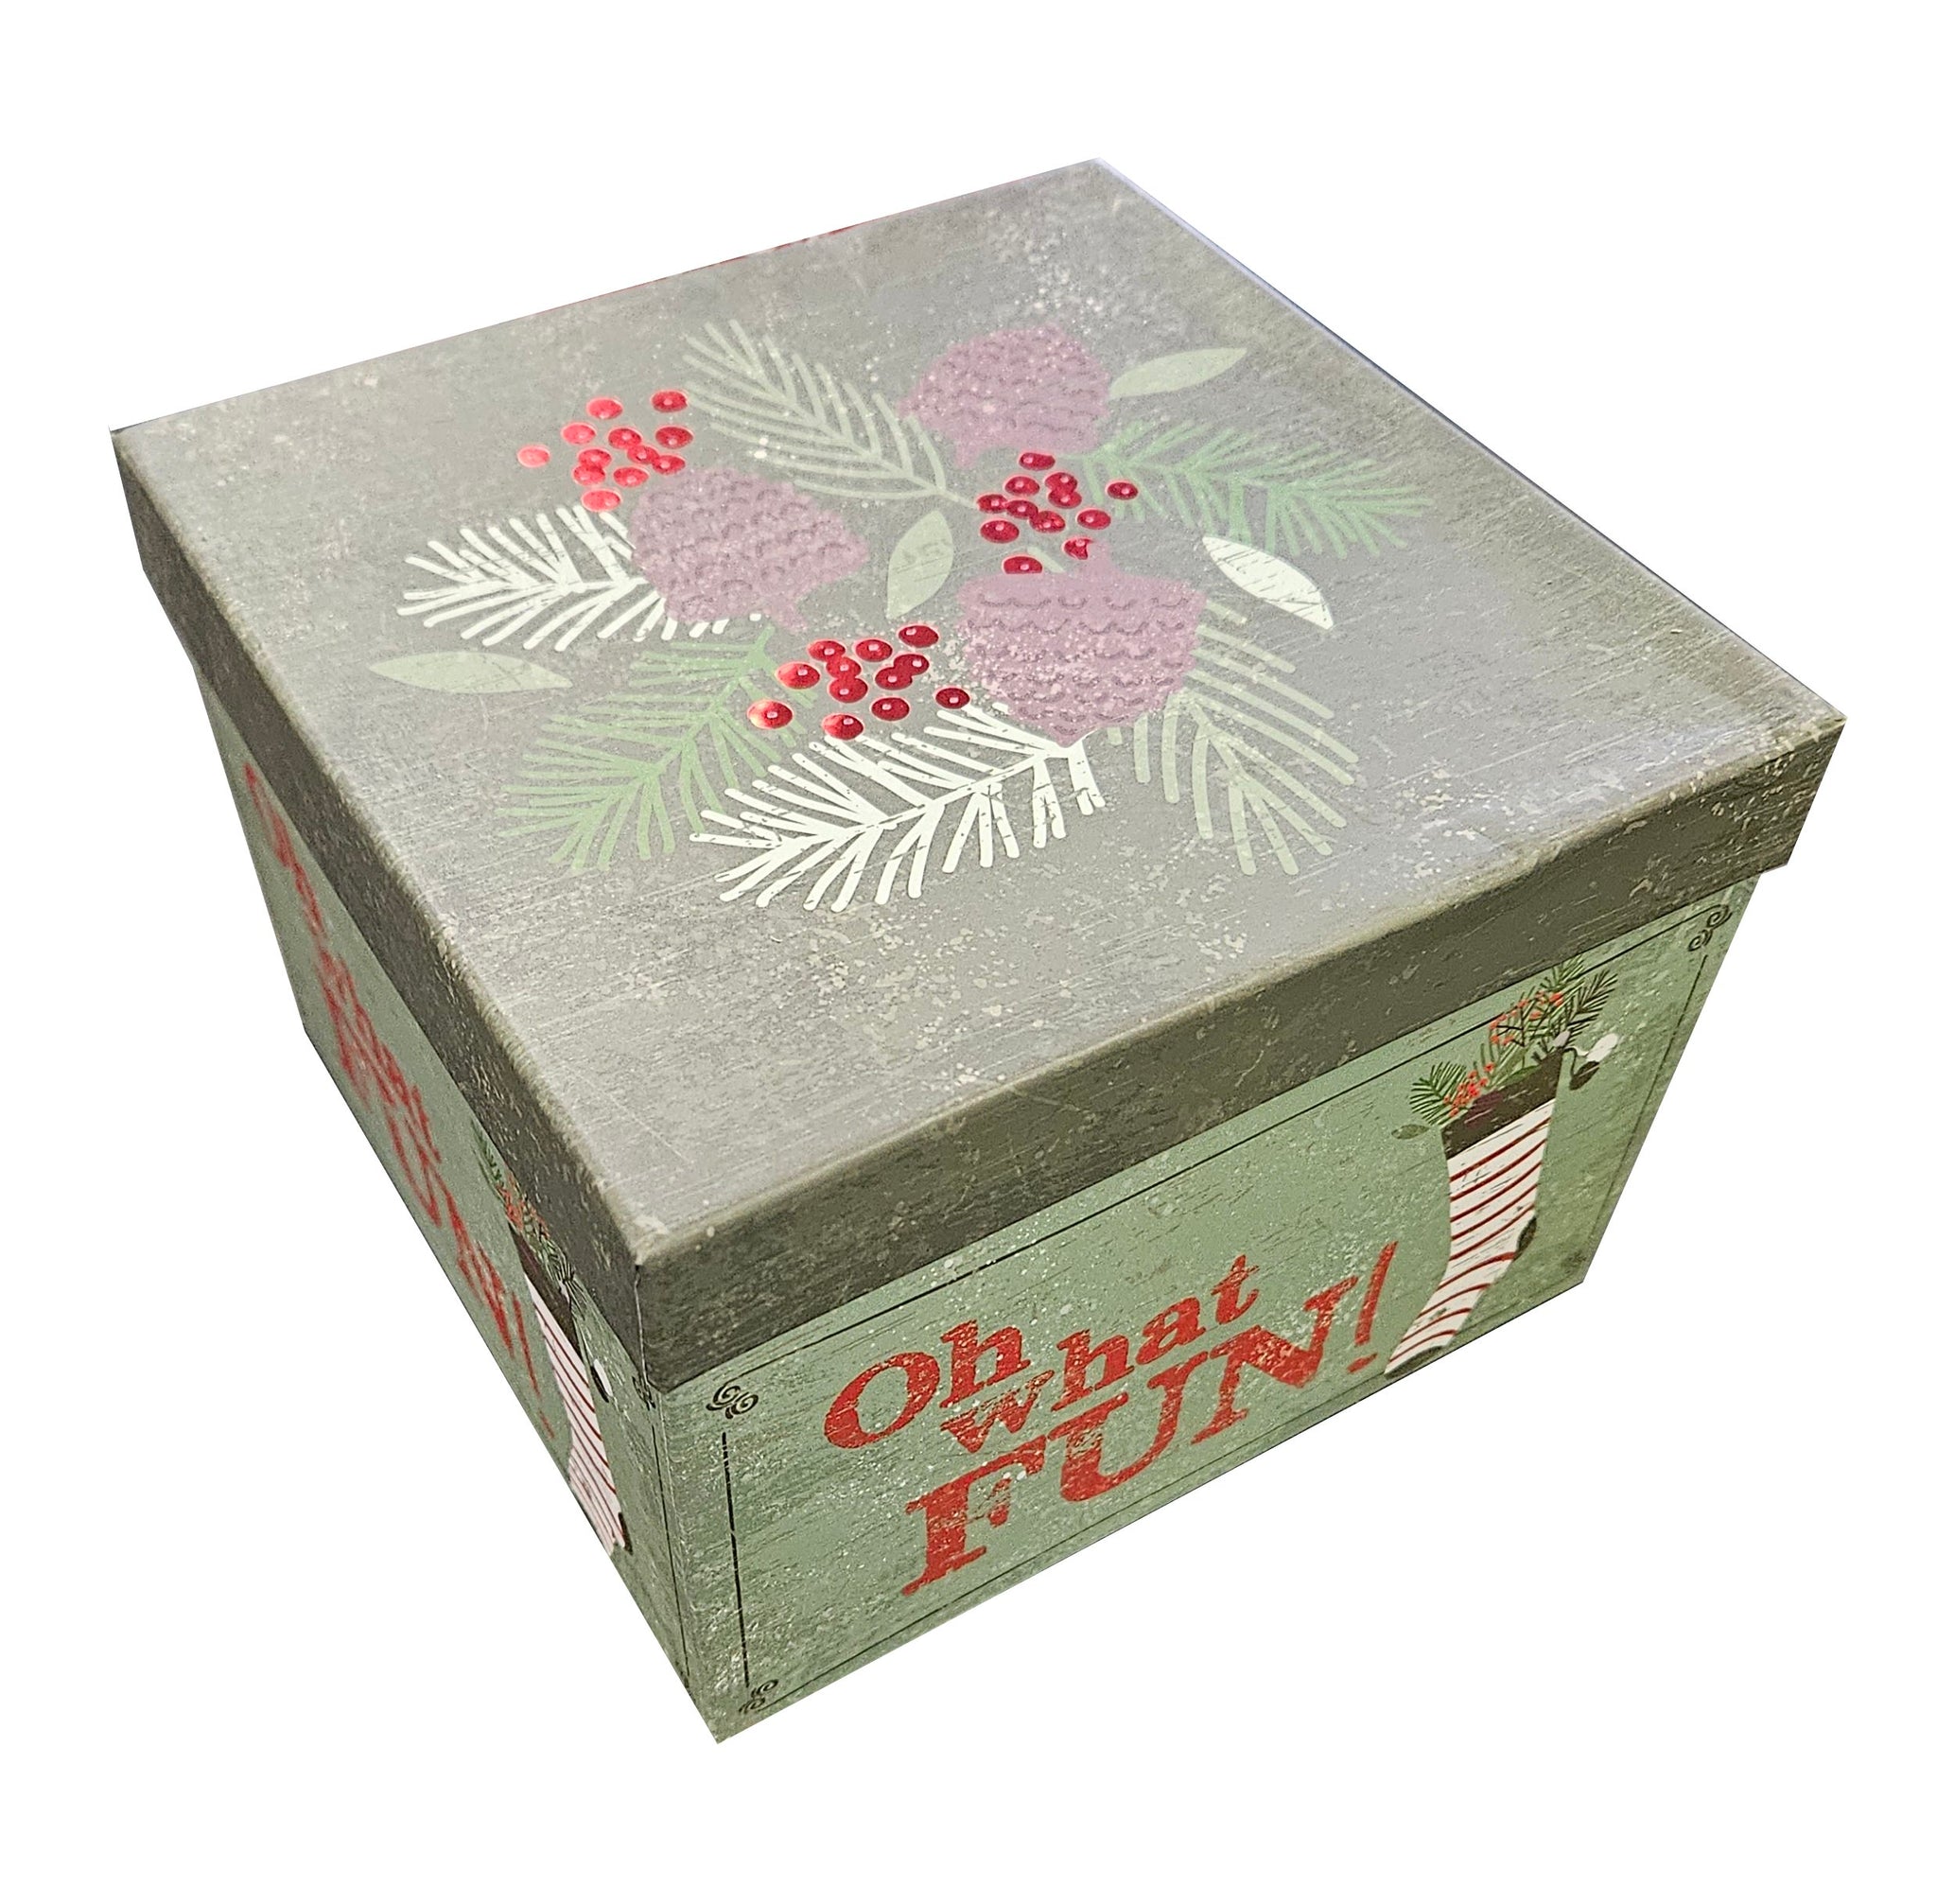 Large Decorative Square Gift Box - Oh what Fun!